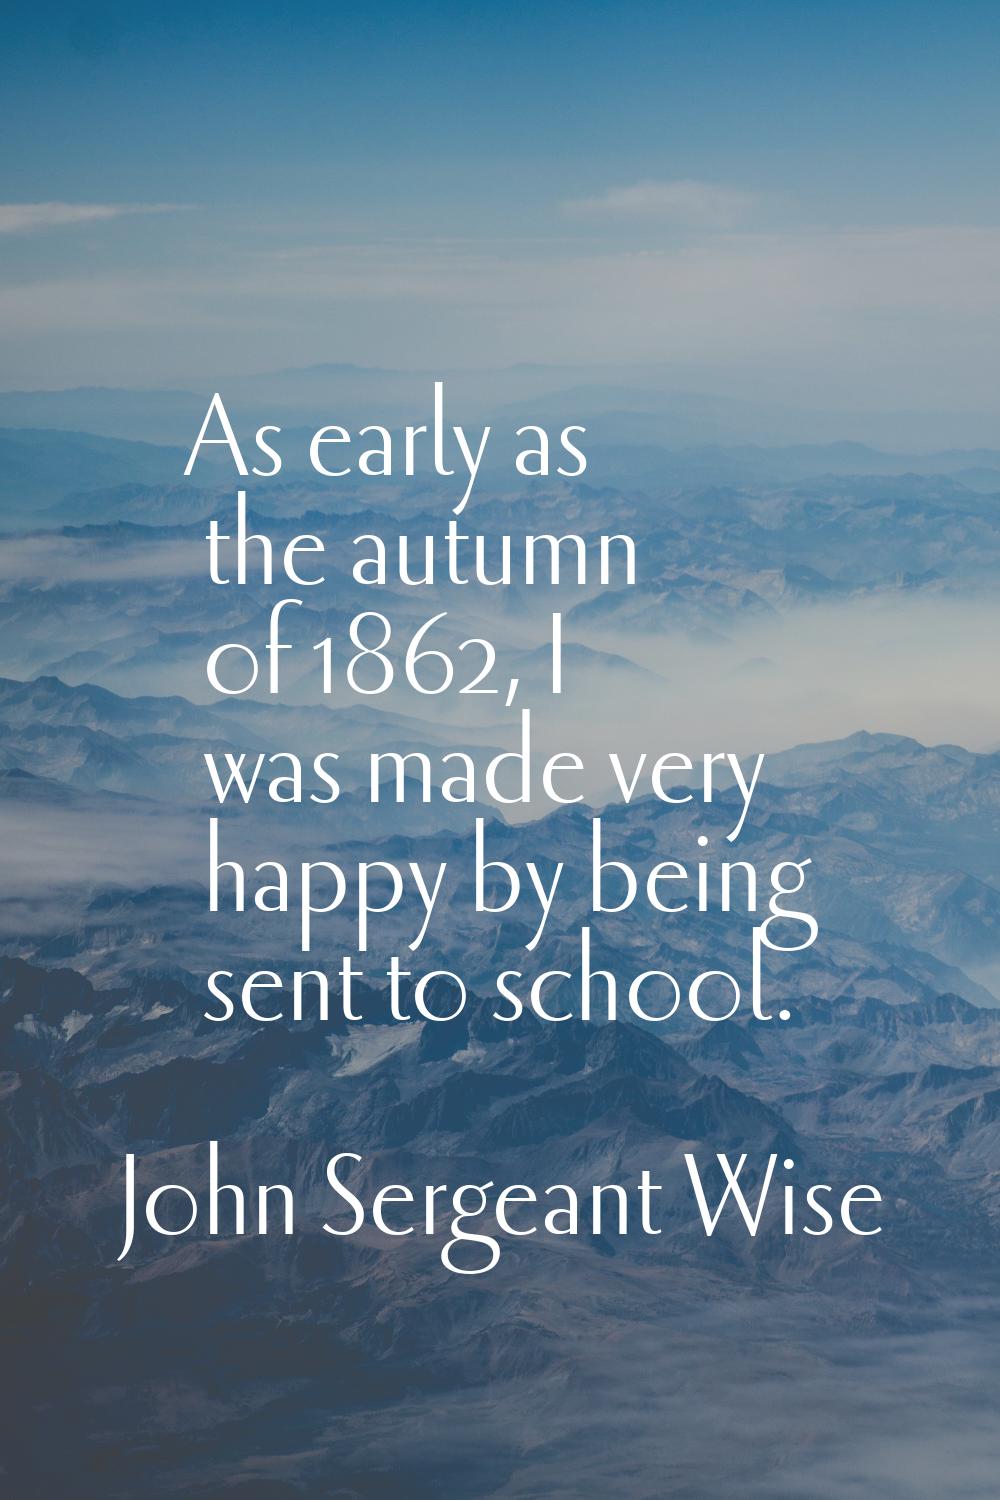 As early as the autumn of 1862, I was made very happy by being sent to school.